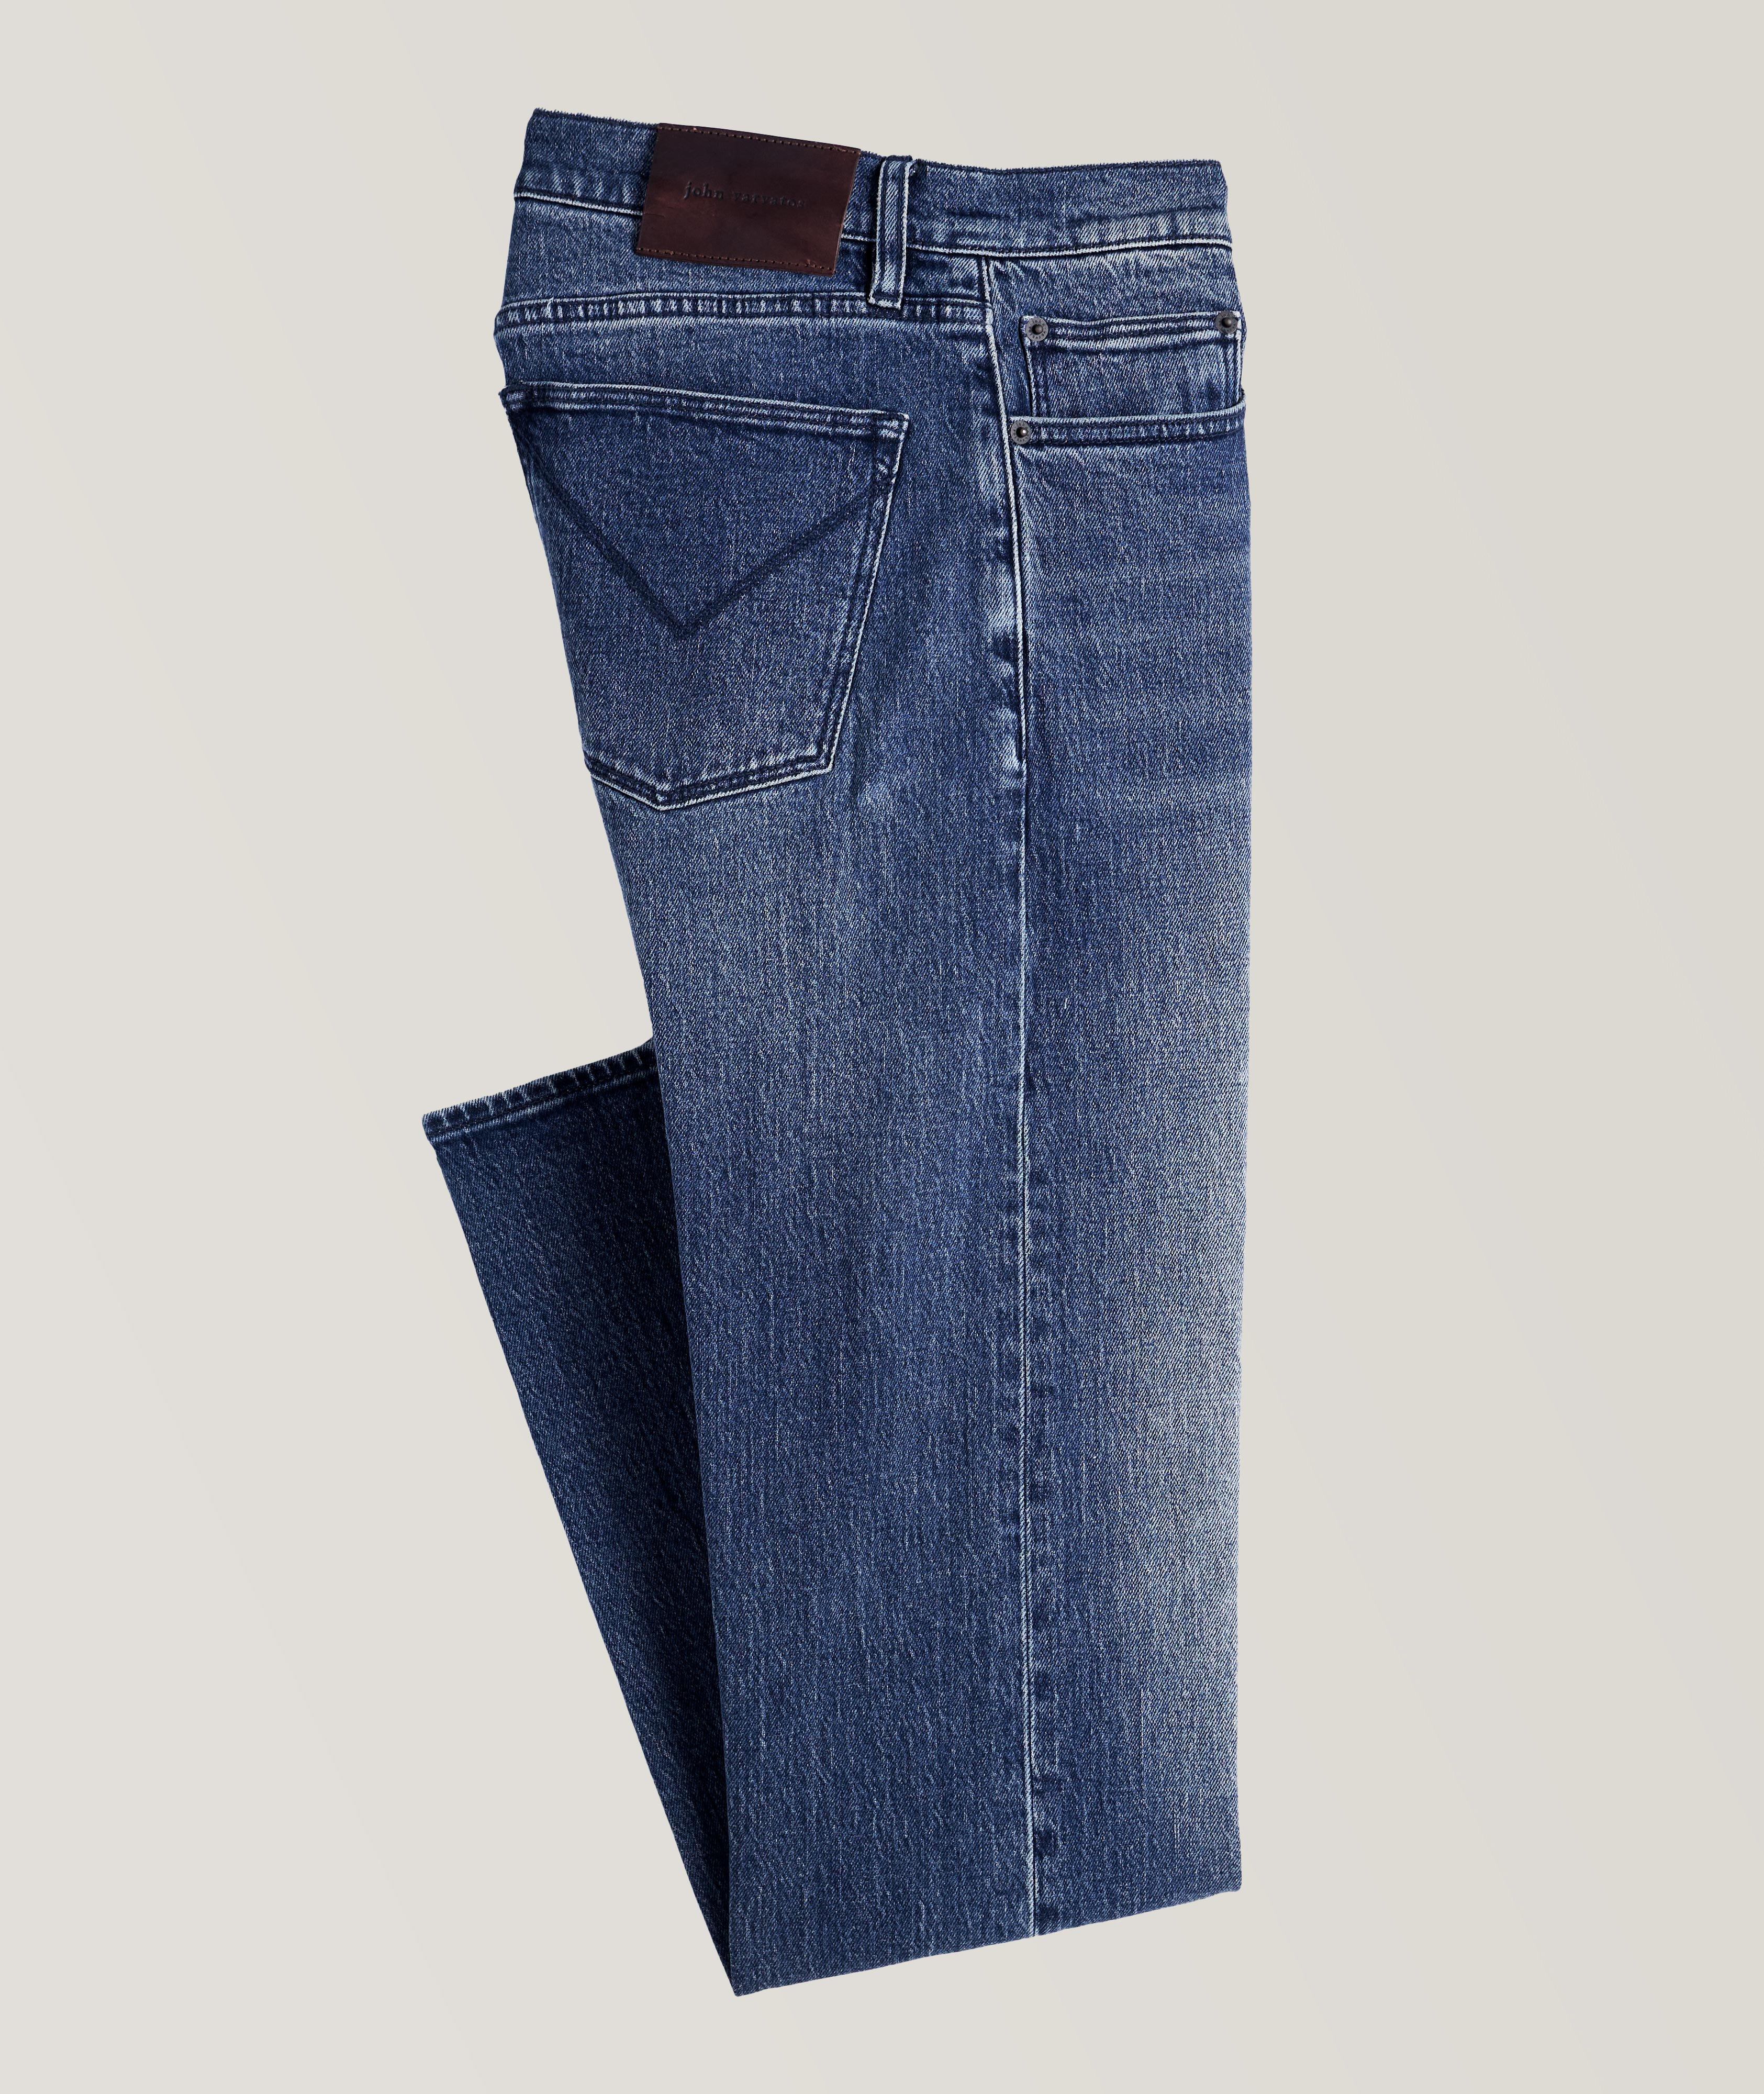 Gregg Stretch-Cotton Jeans image 0